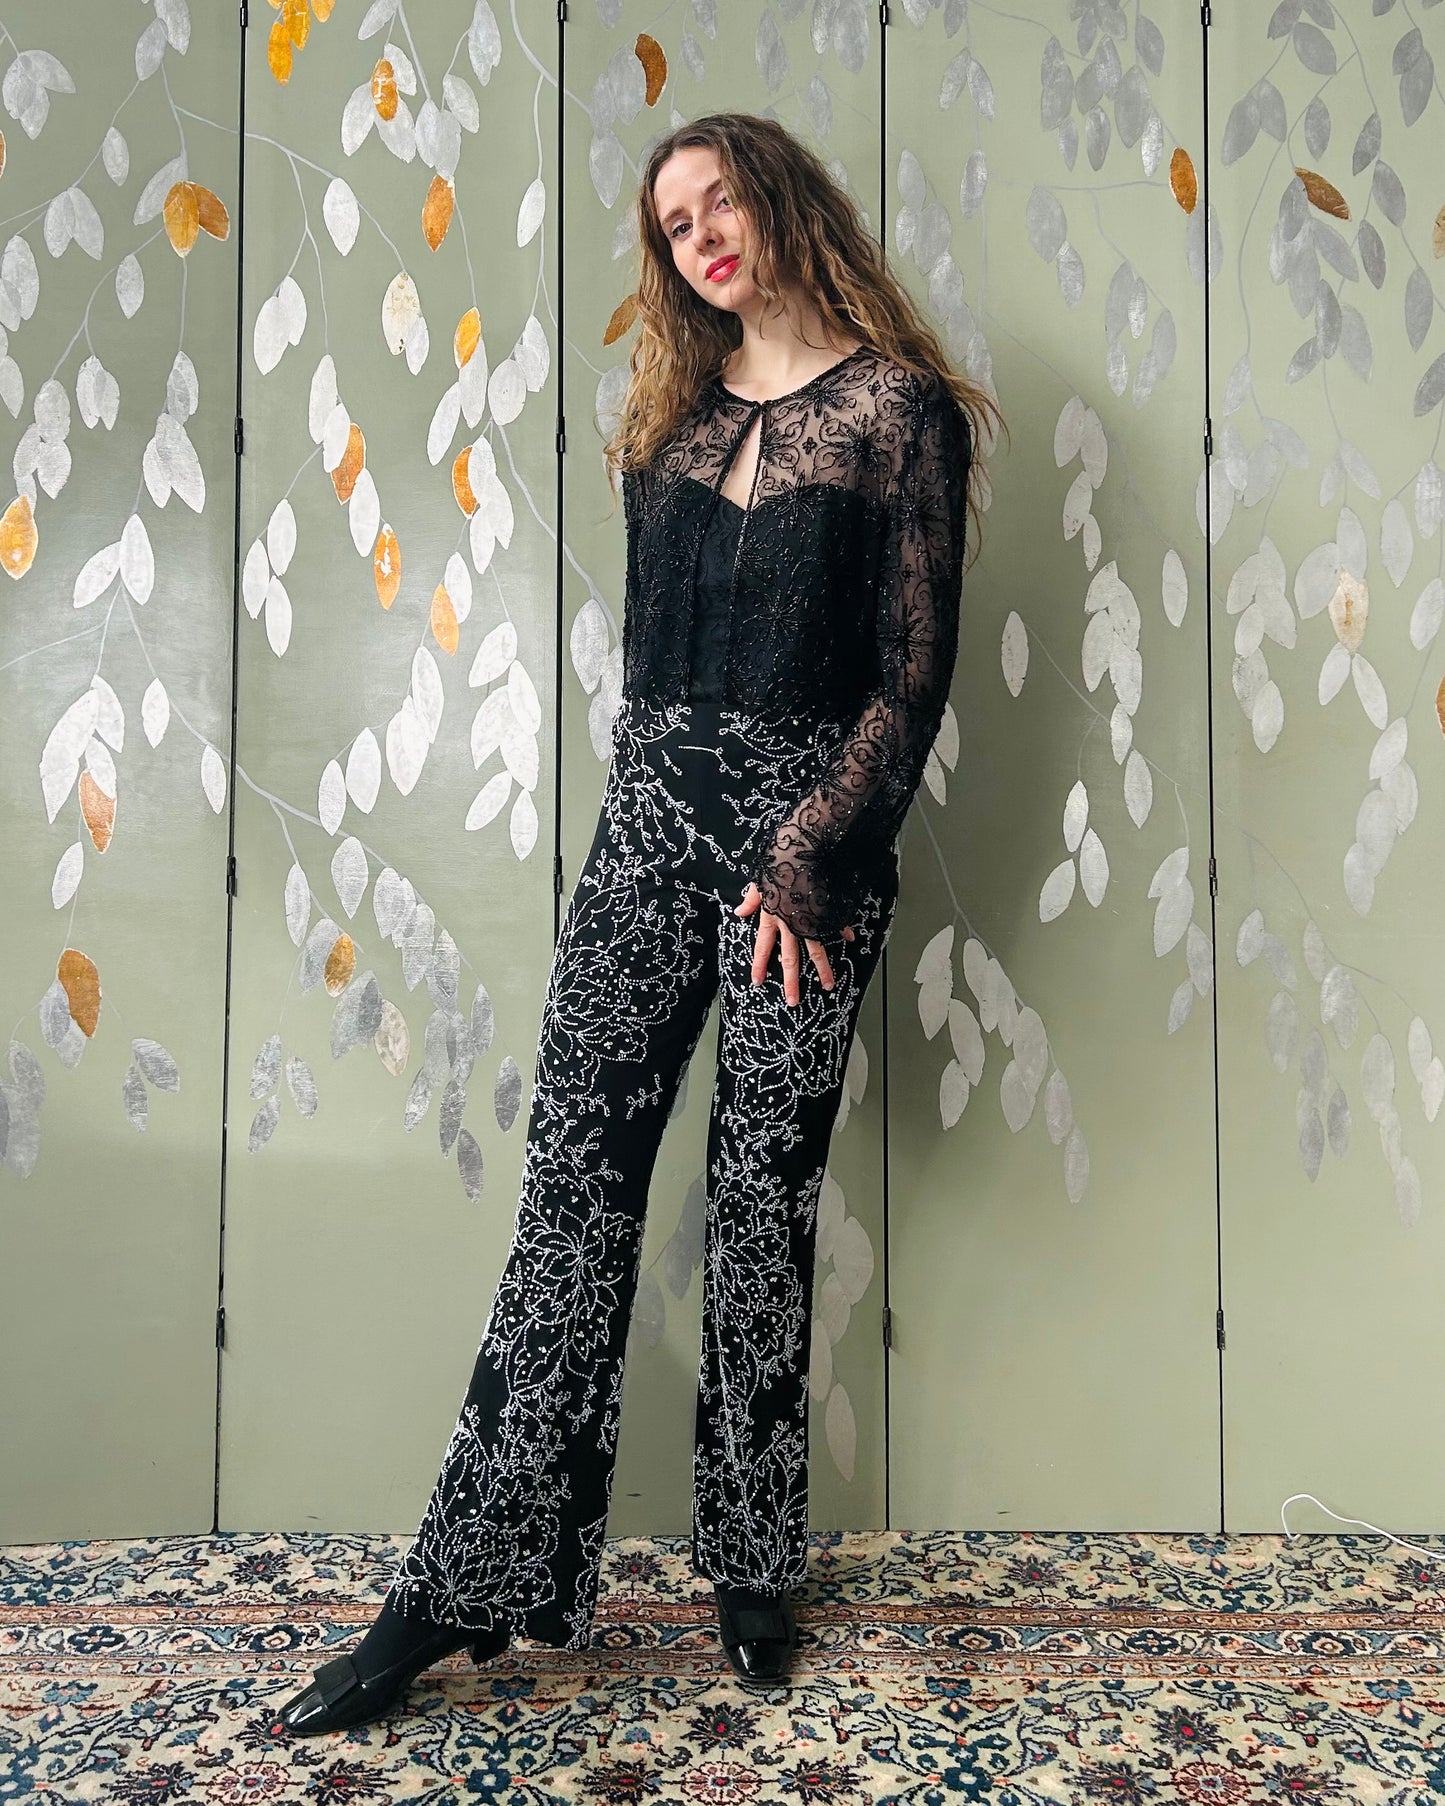 y2k silver beaded flower design sequinned black pants kick flares with stretch